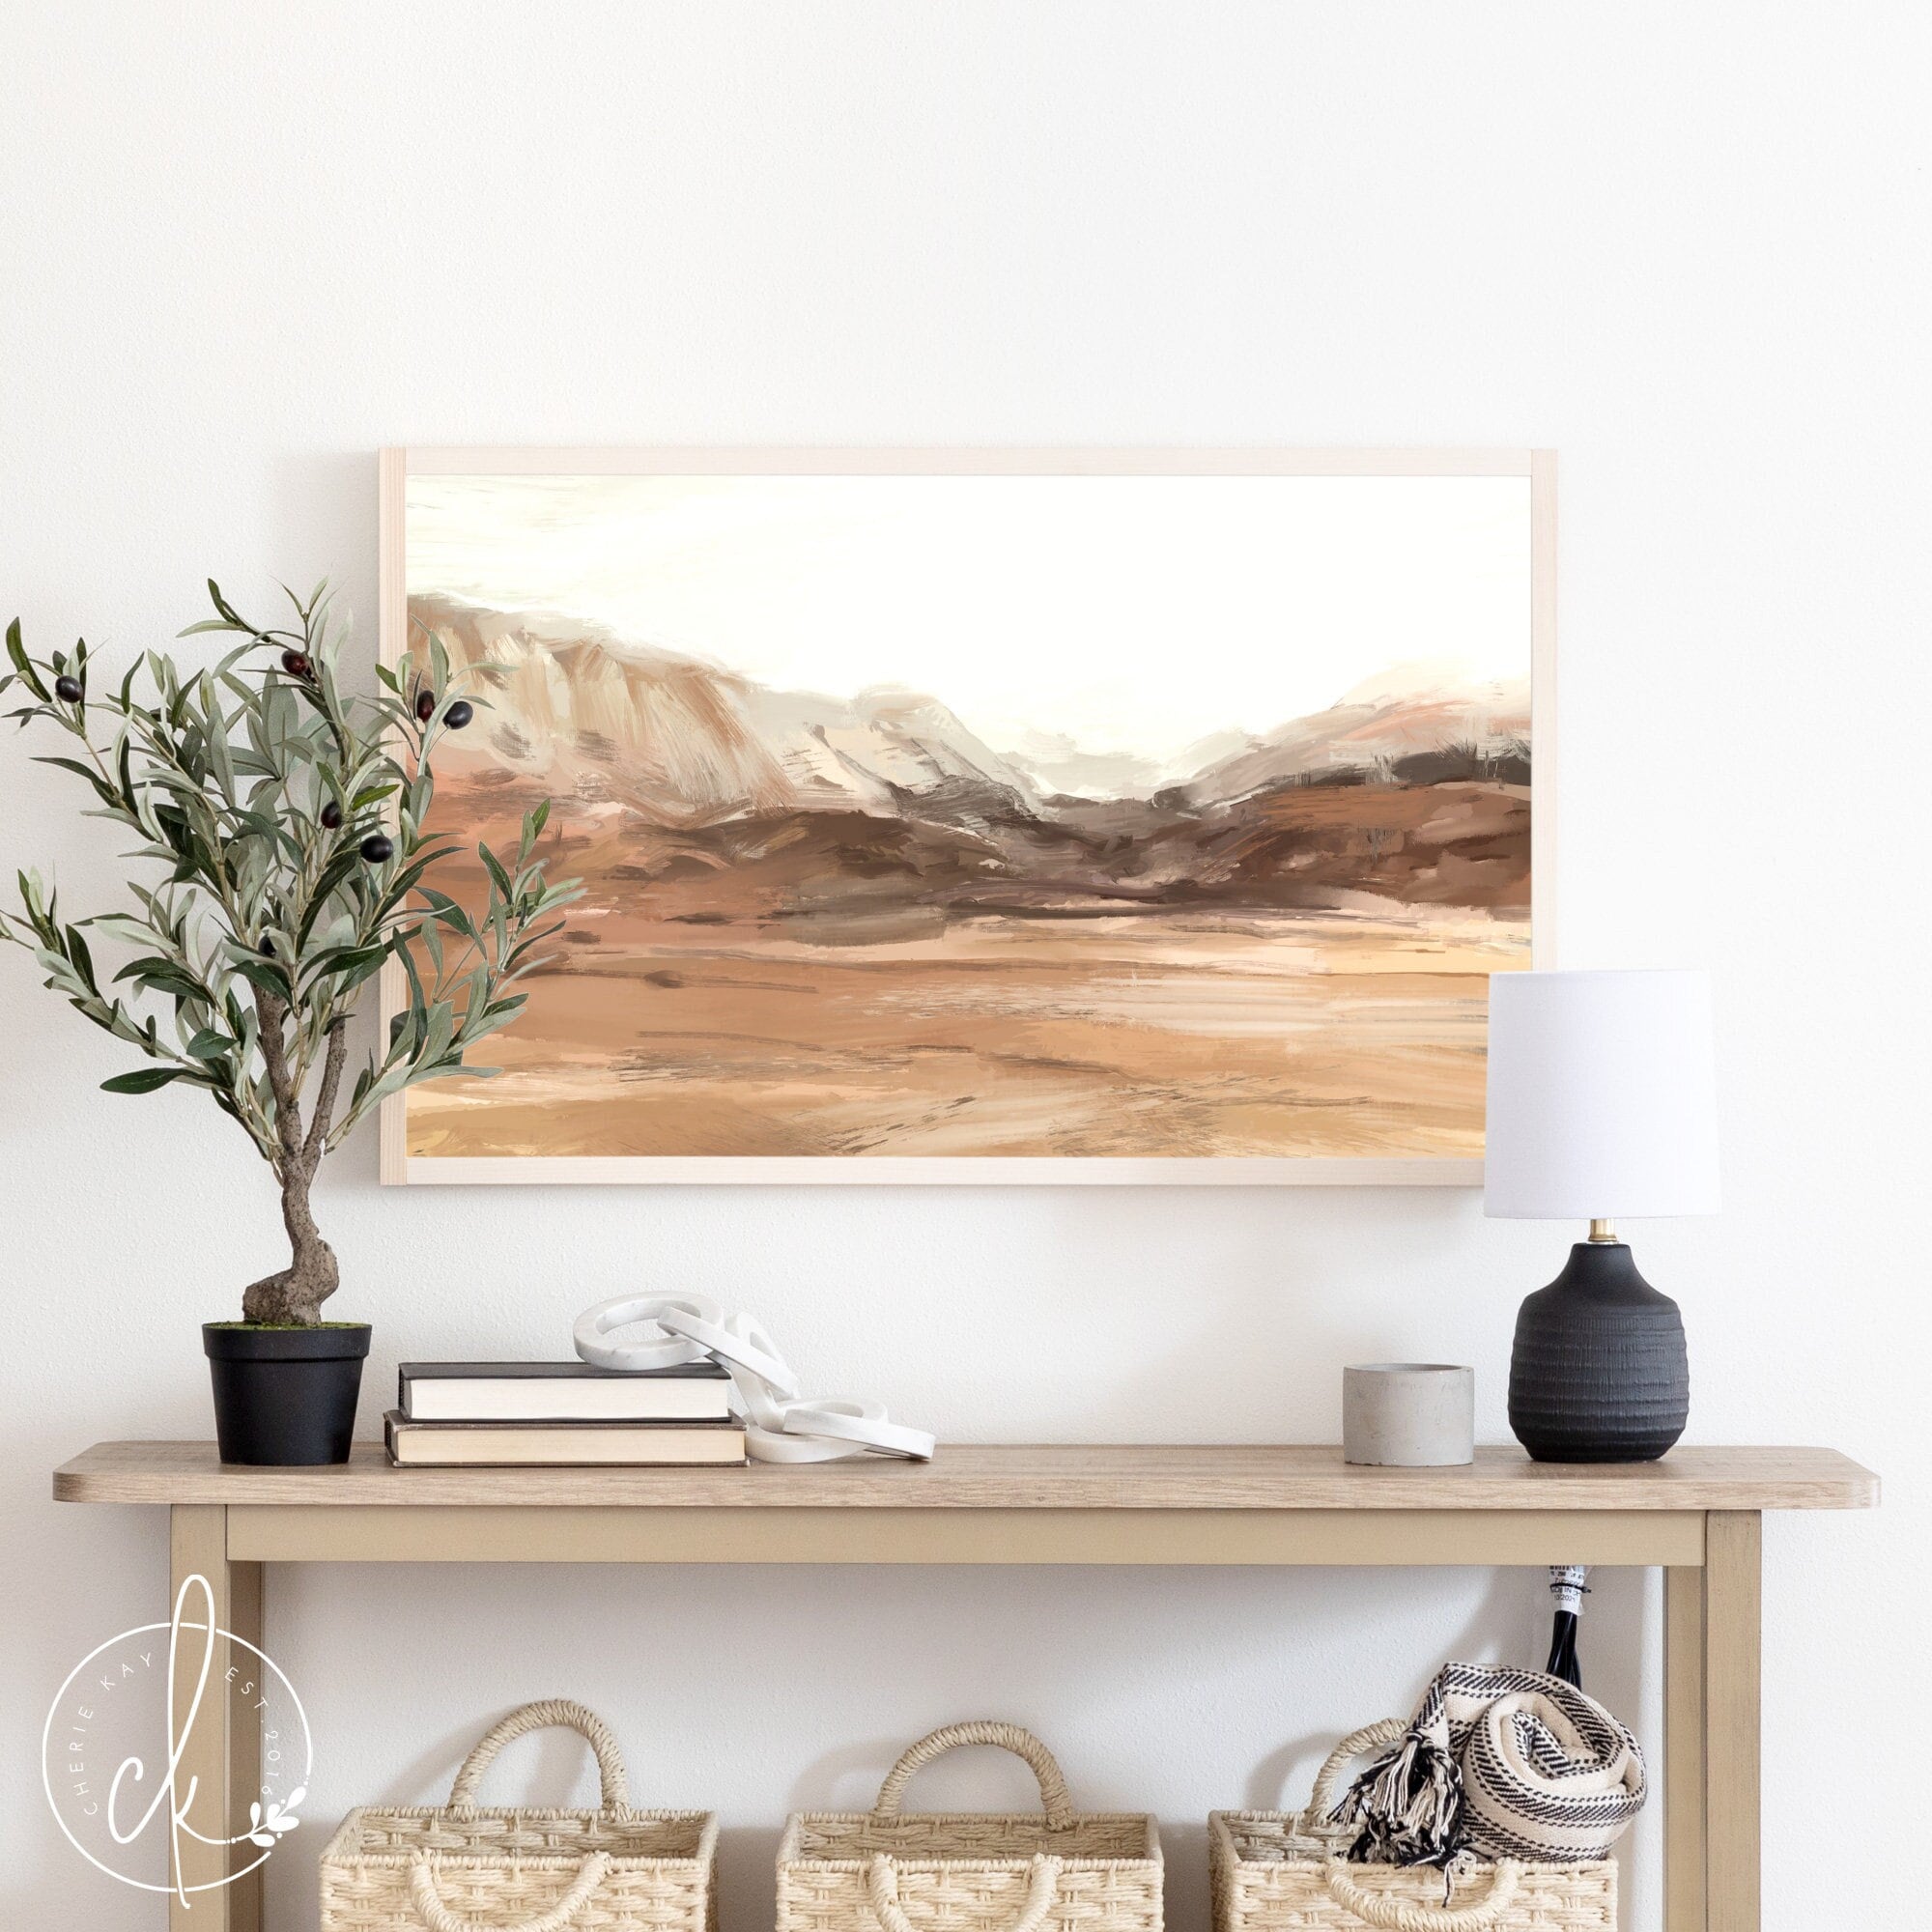 This is an abstract painting of a desert landscape. The painting is printed on wood and framed with a pine frame. The painting is displayed above a table with beautiful home decor.